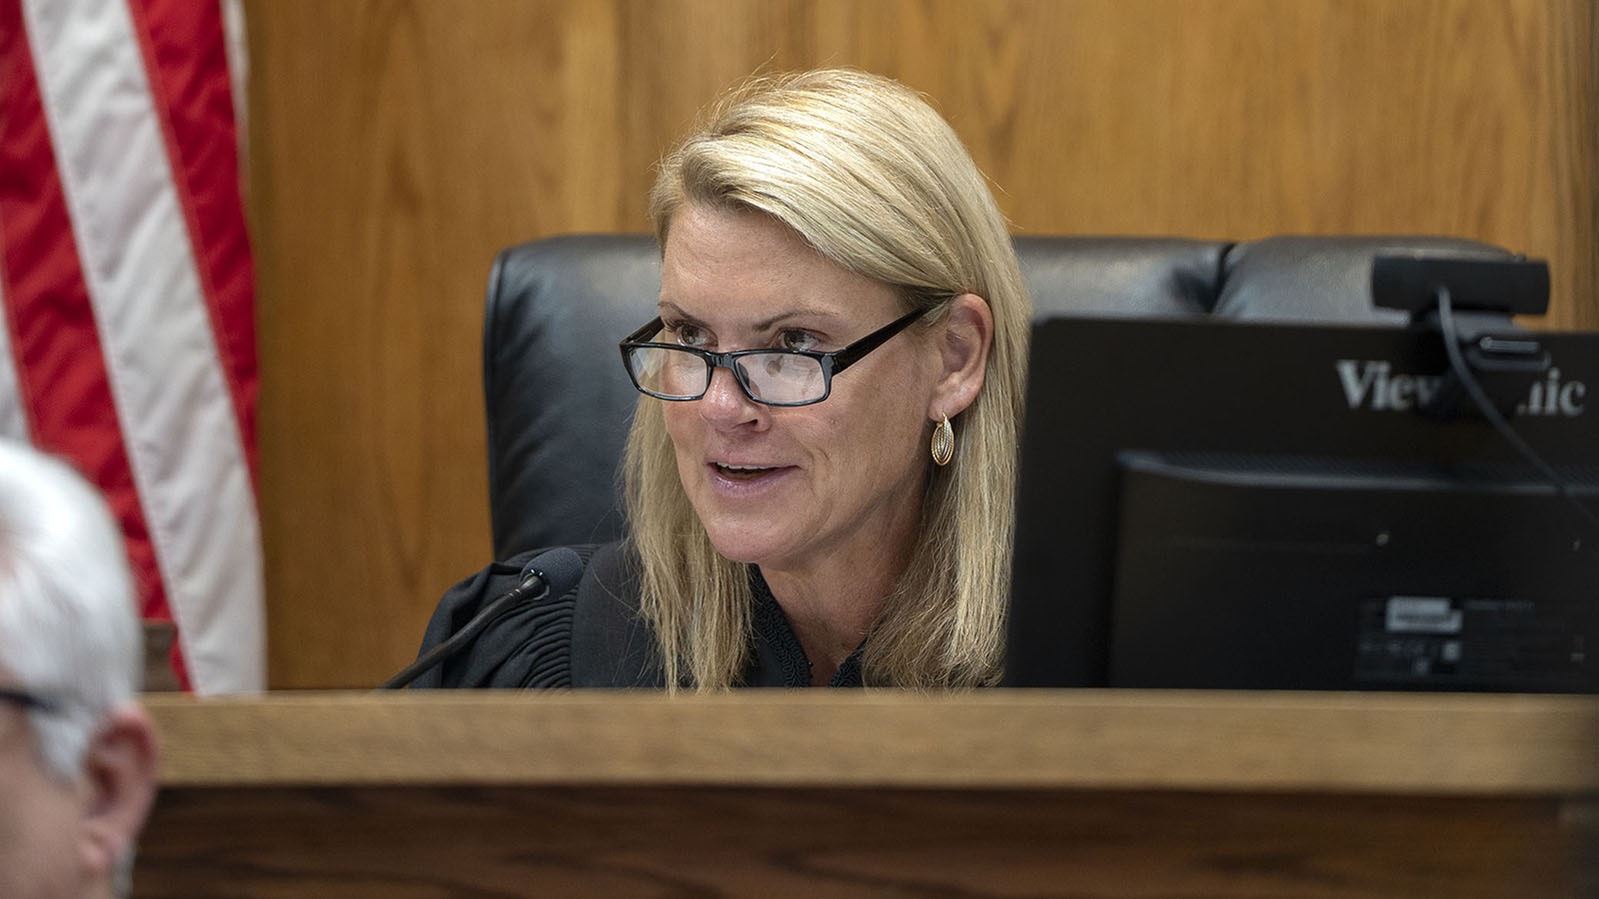 Teton County District Court Judge Melissa Owens speaks during a hearing where she denied a request by lawmakers, Wyoming Secretary of State Chuck Gray and Right to Life Wyoming to defend the laws that ban most abortions in the state.